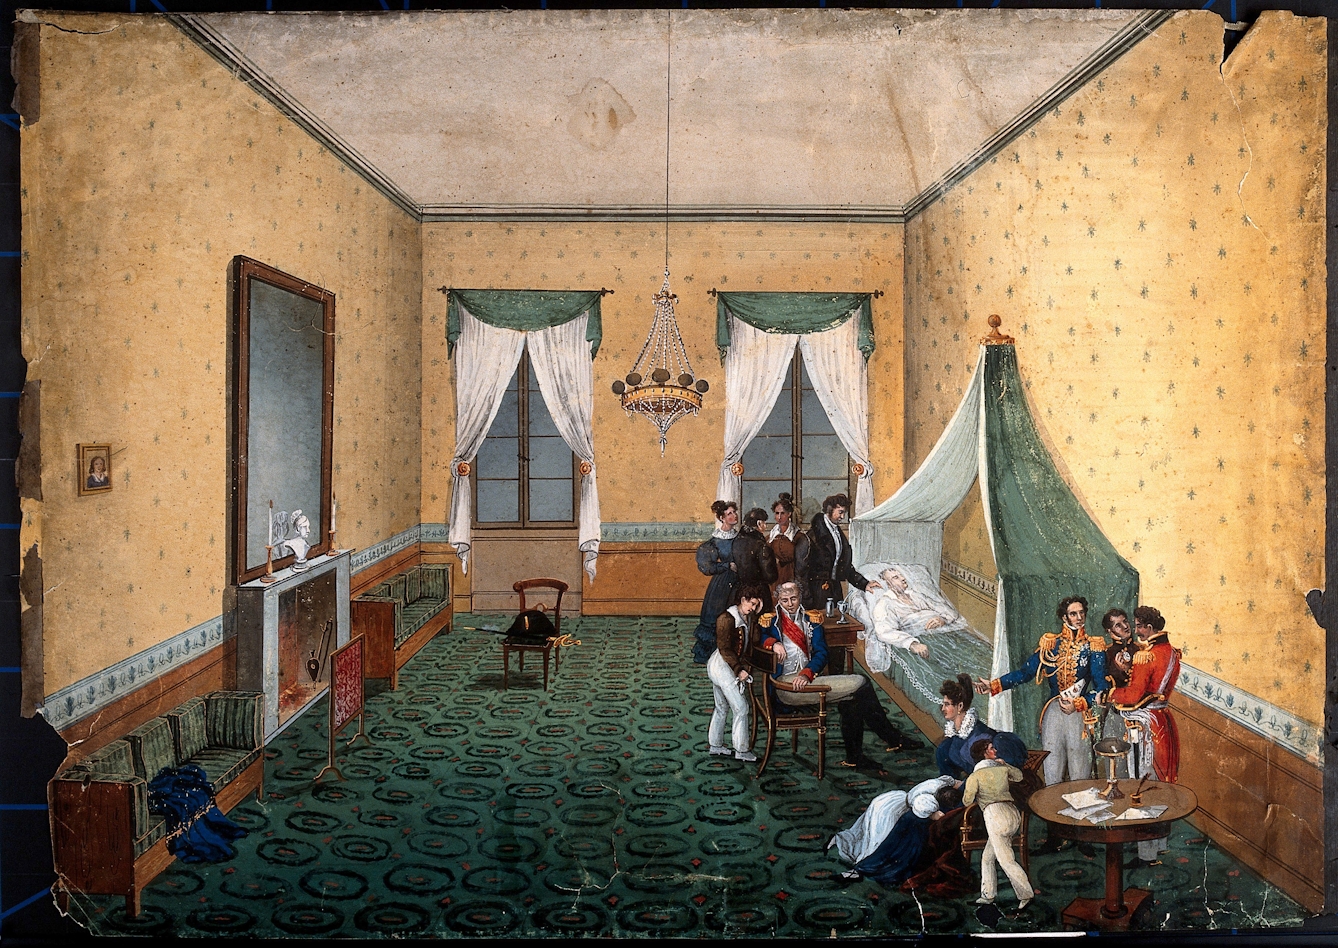 Watercolour showing the interior of a grand bedroom, with a dying man in bed being attended by several men and women.